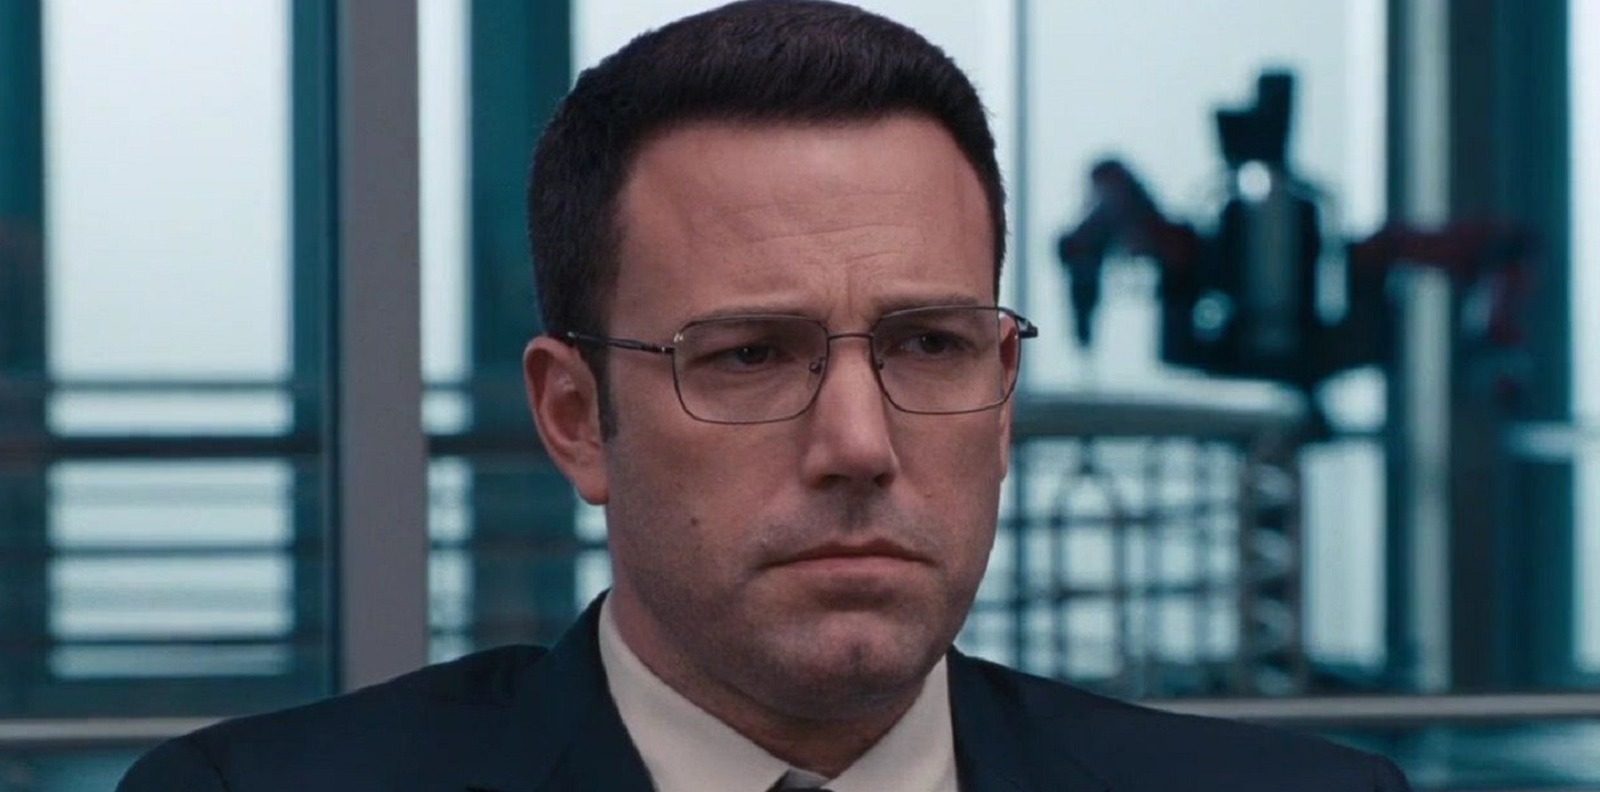 The Accountant 2 Starts Filming in Los Angeles Later This Year